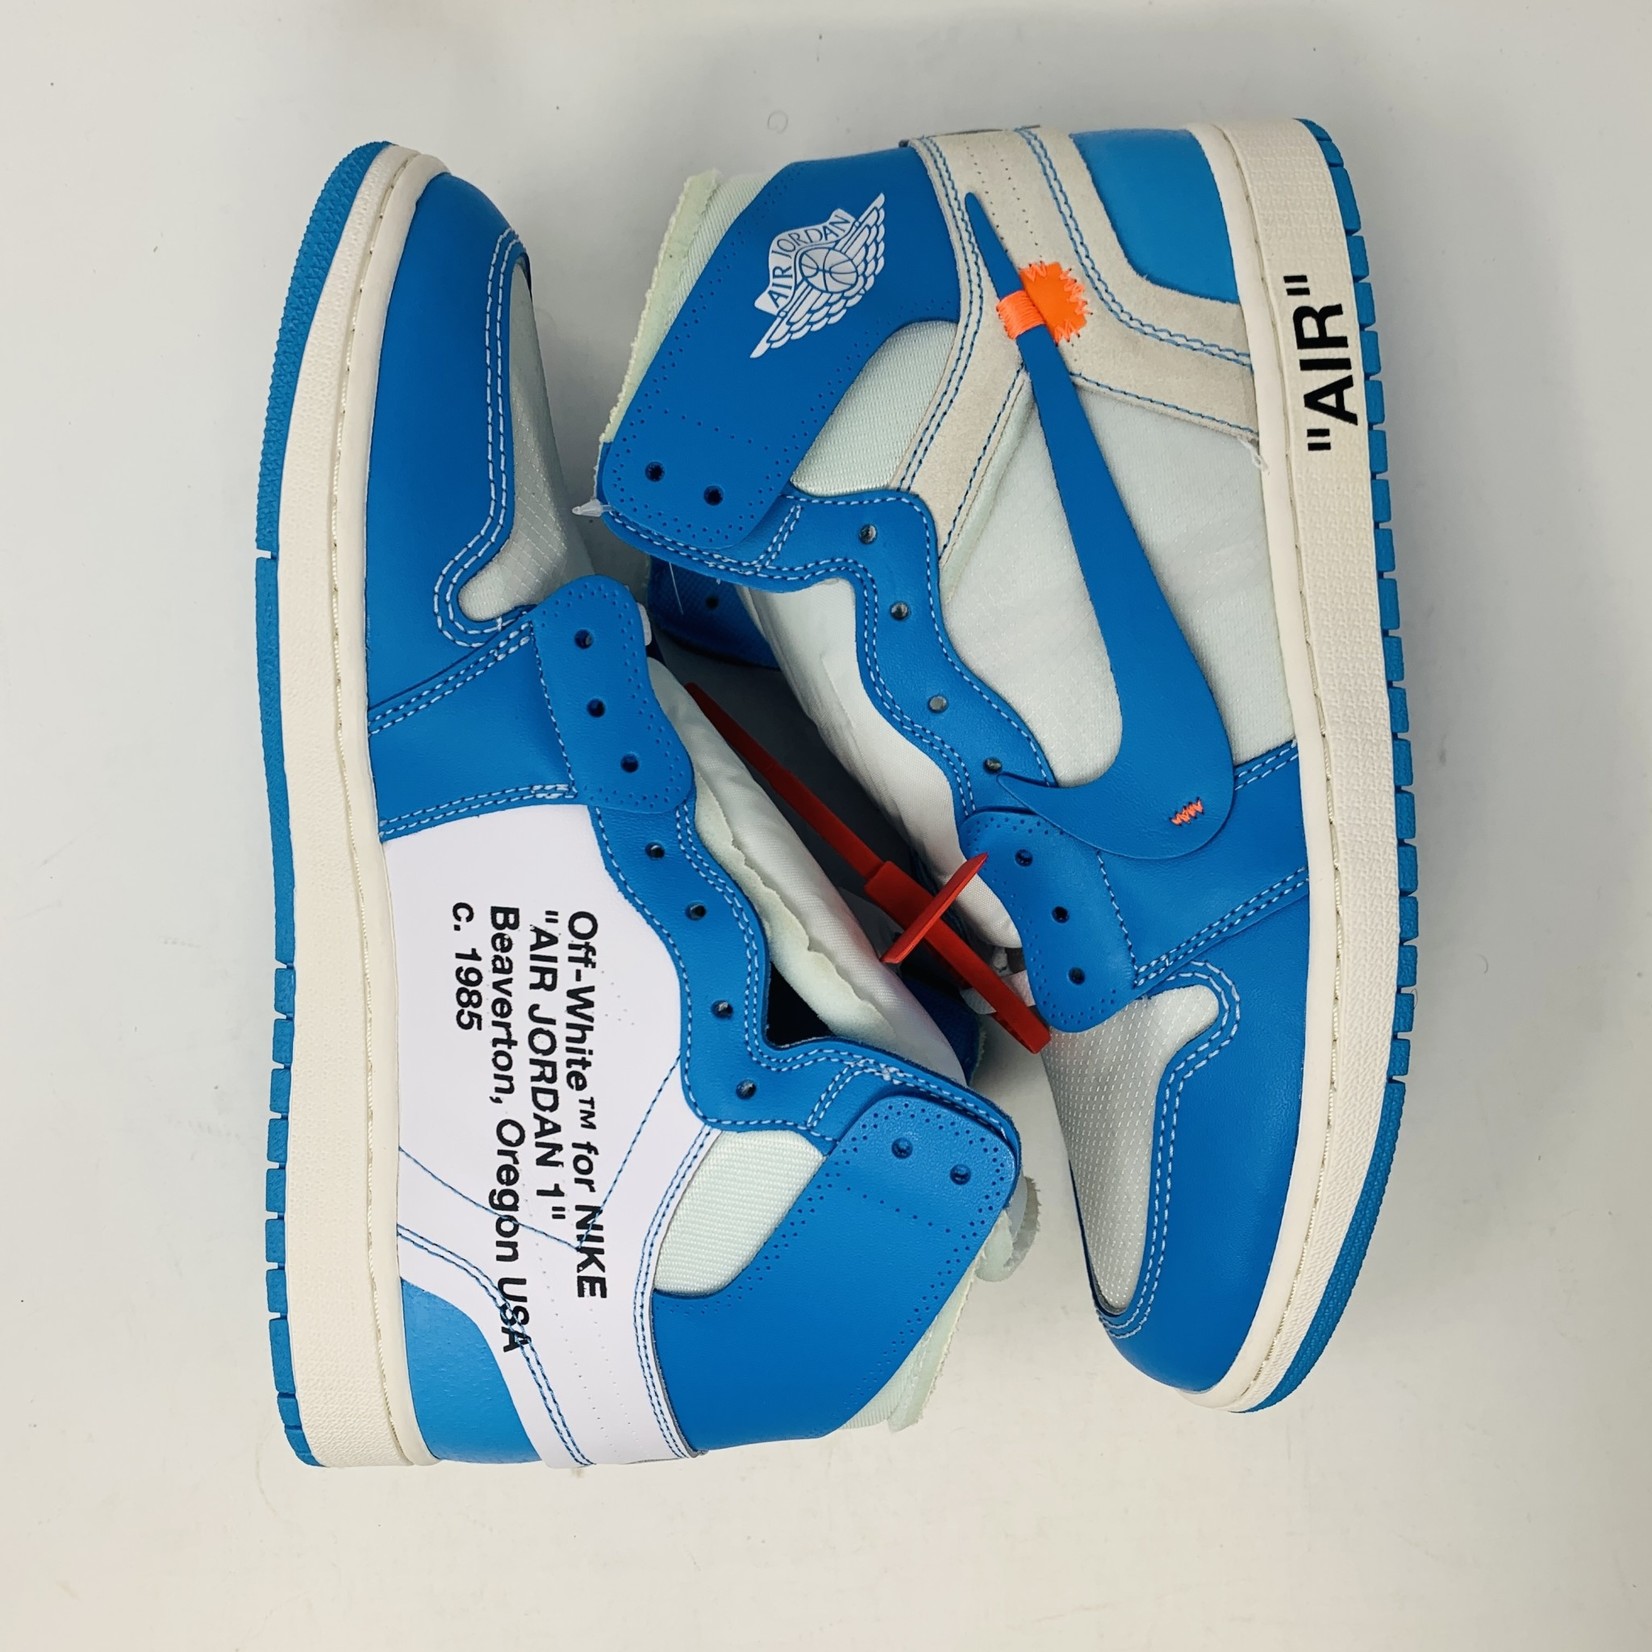 Nike Just Released the 'UNC' Off-White x Air Jordan 1